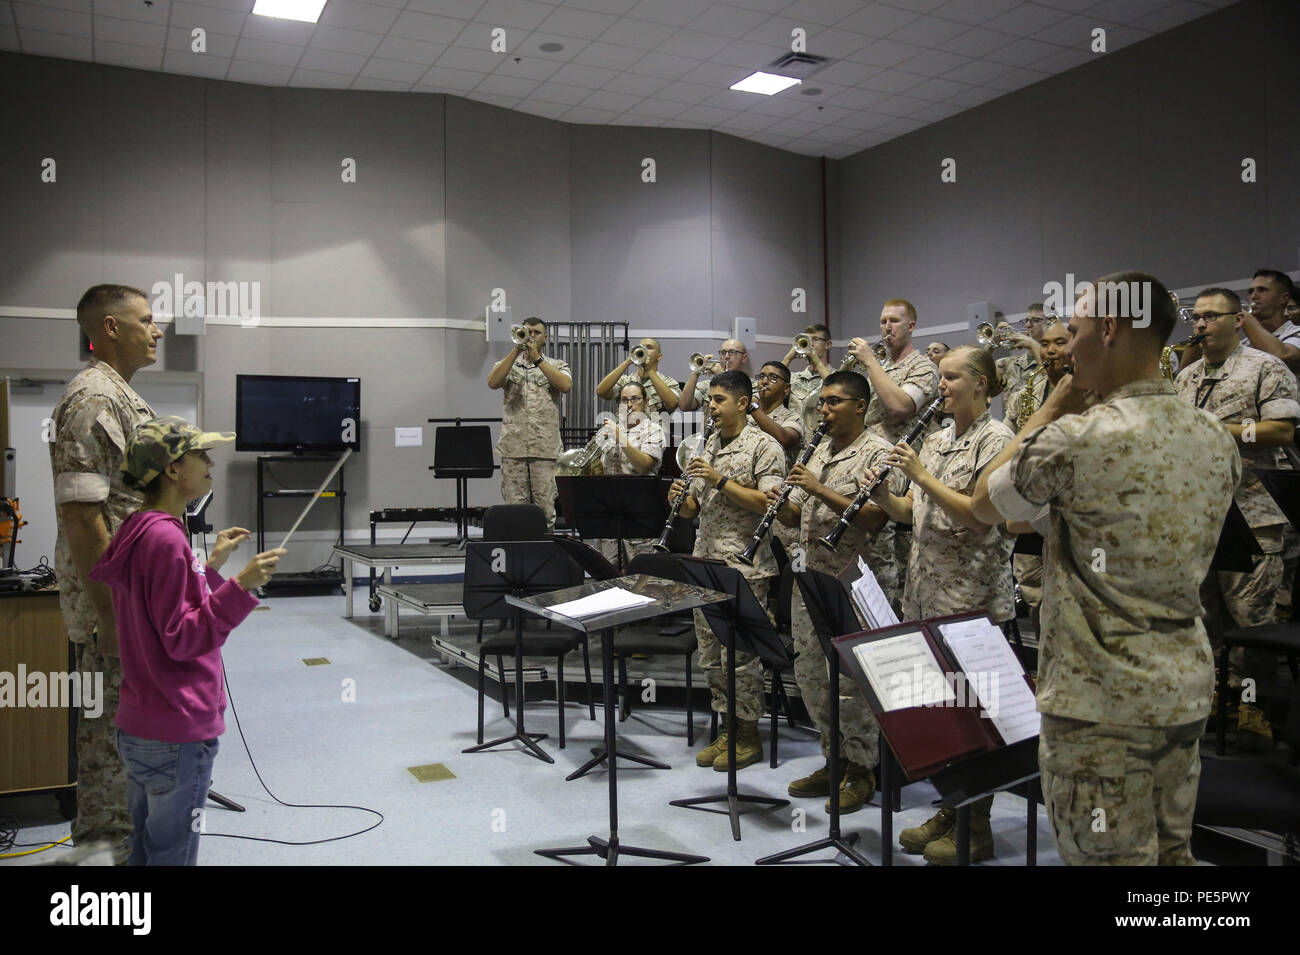 Amber N. Carter, a resident of Hubert, N.C., conducts “The Marines’ Hymn” for the 2nd Marine Division Band during her visit to their rehearsal at the band’s command post at Camp Lejeune, N.C., Sept. 29, 2015. Amber always dreamed of joining the Marine Corps, but could not due to William’s syndrome. Staff Sgt. Isaiah Riley, a mess chief with 10th Marine Regiment, brought her and her family aboard the base to watch the band play. (U.S. Marine Corps photo by Cpl. Paul S. Martinez/Released) Stock Photo